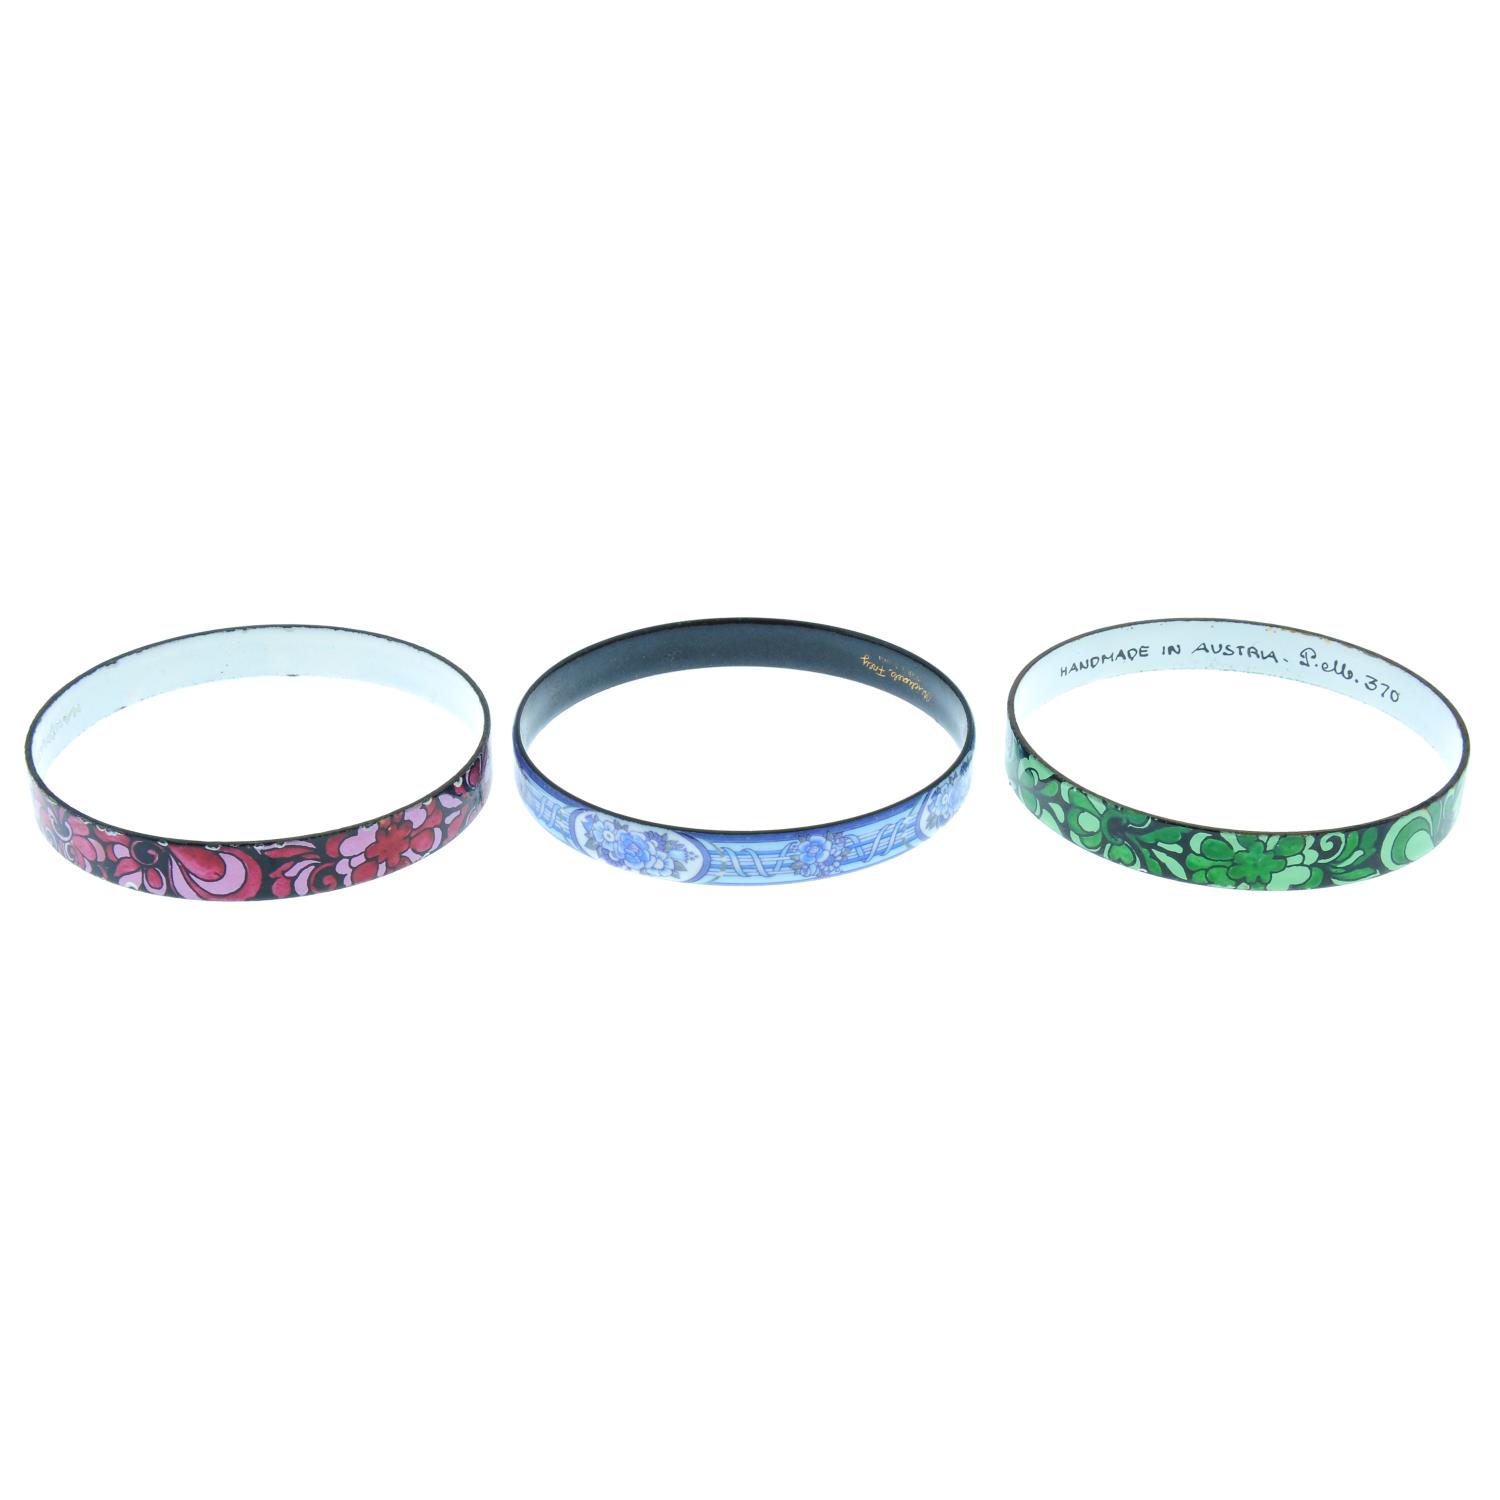 Eleven enamel bangles and a brooch, by Michaela Frey, together with four further enamel bangles.